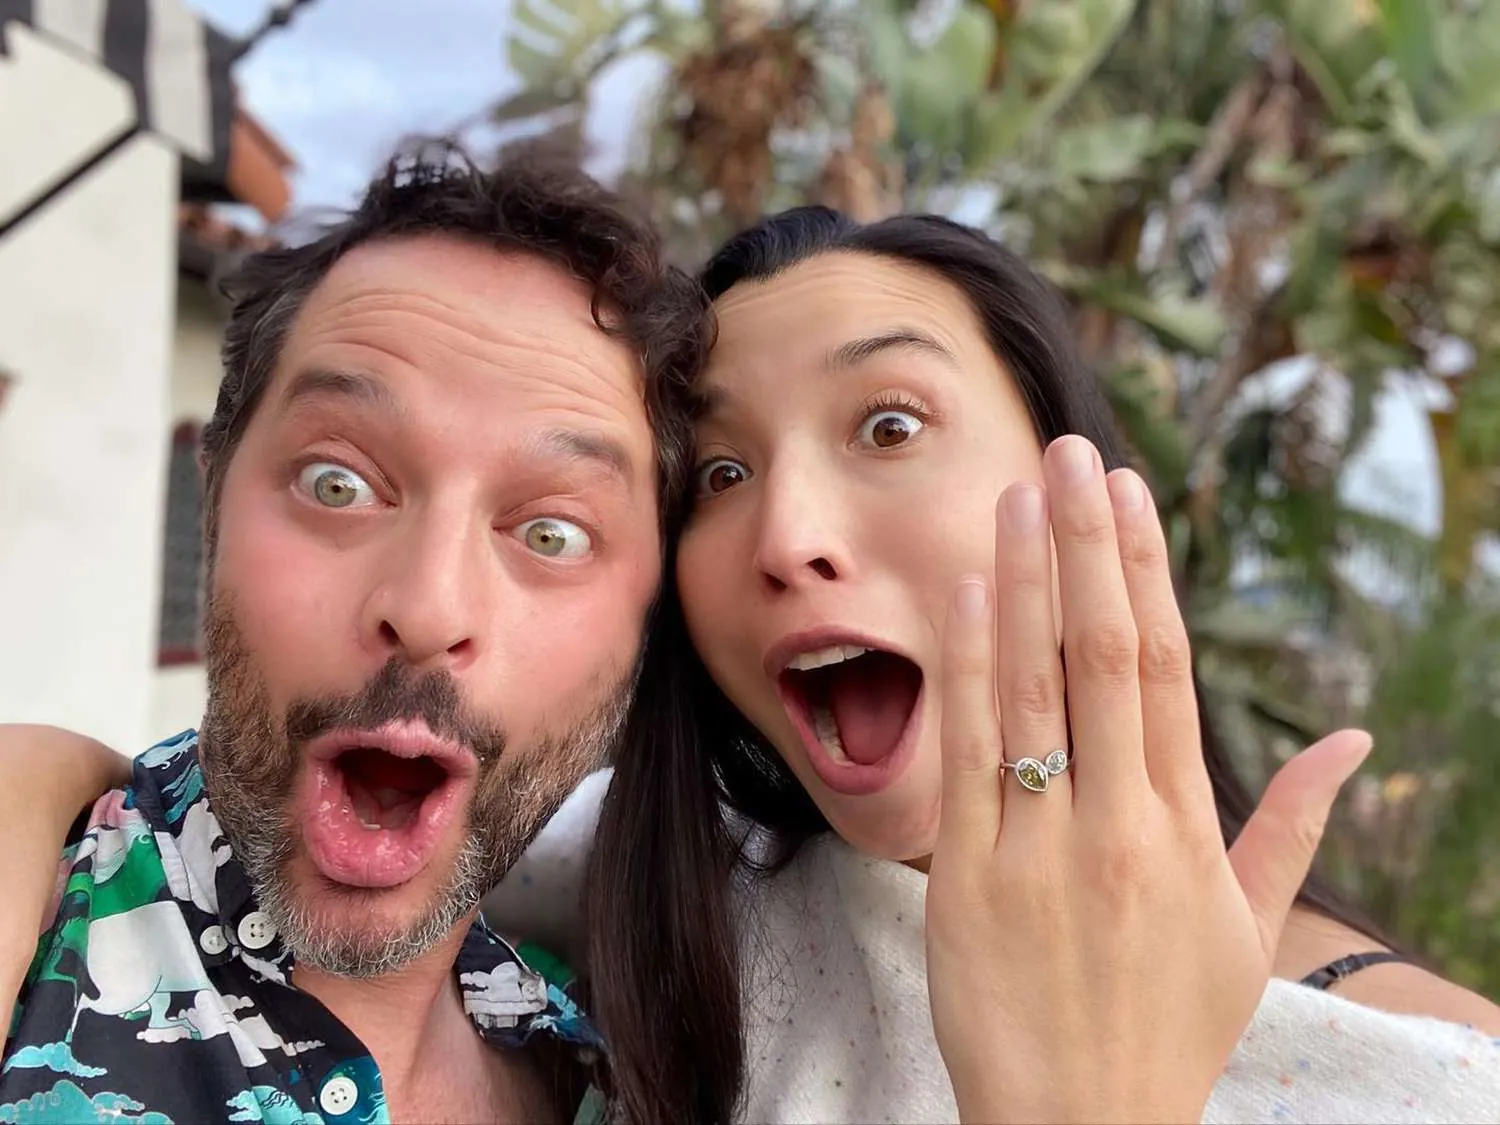 When Did Nick Kroll And Lily Kwong Meet?